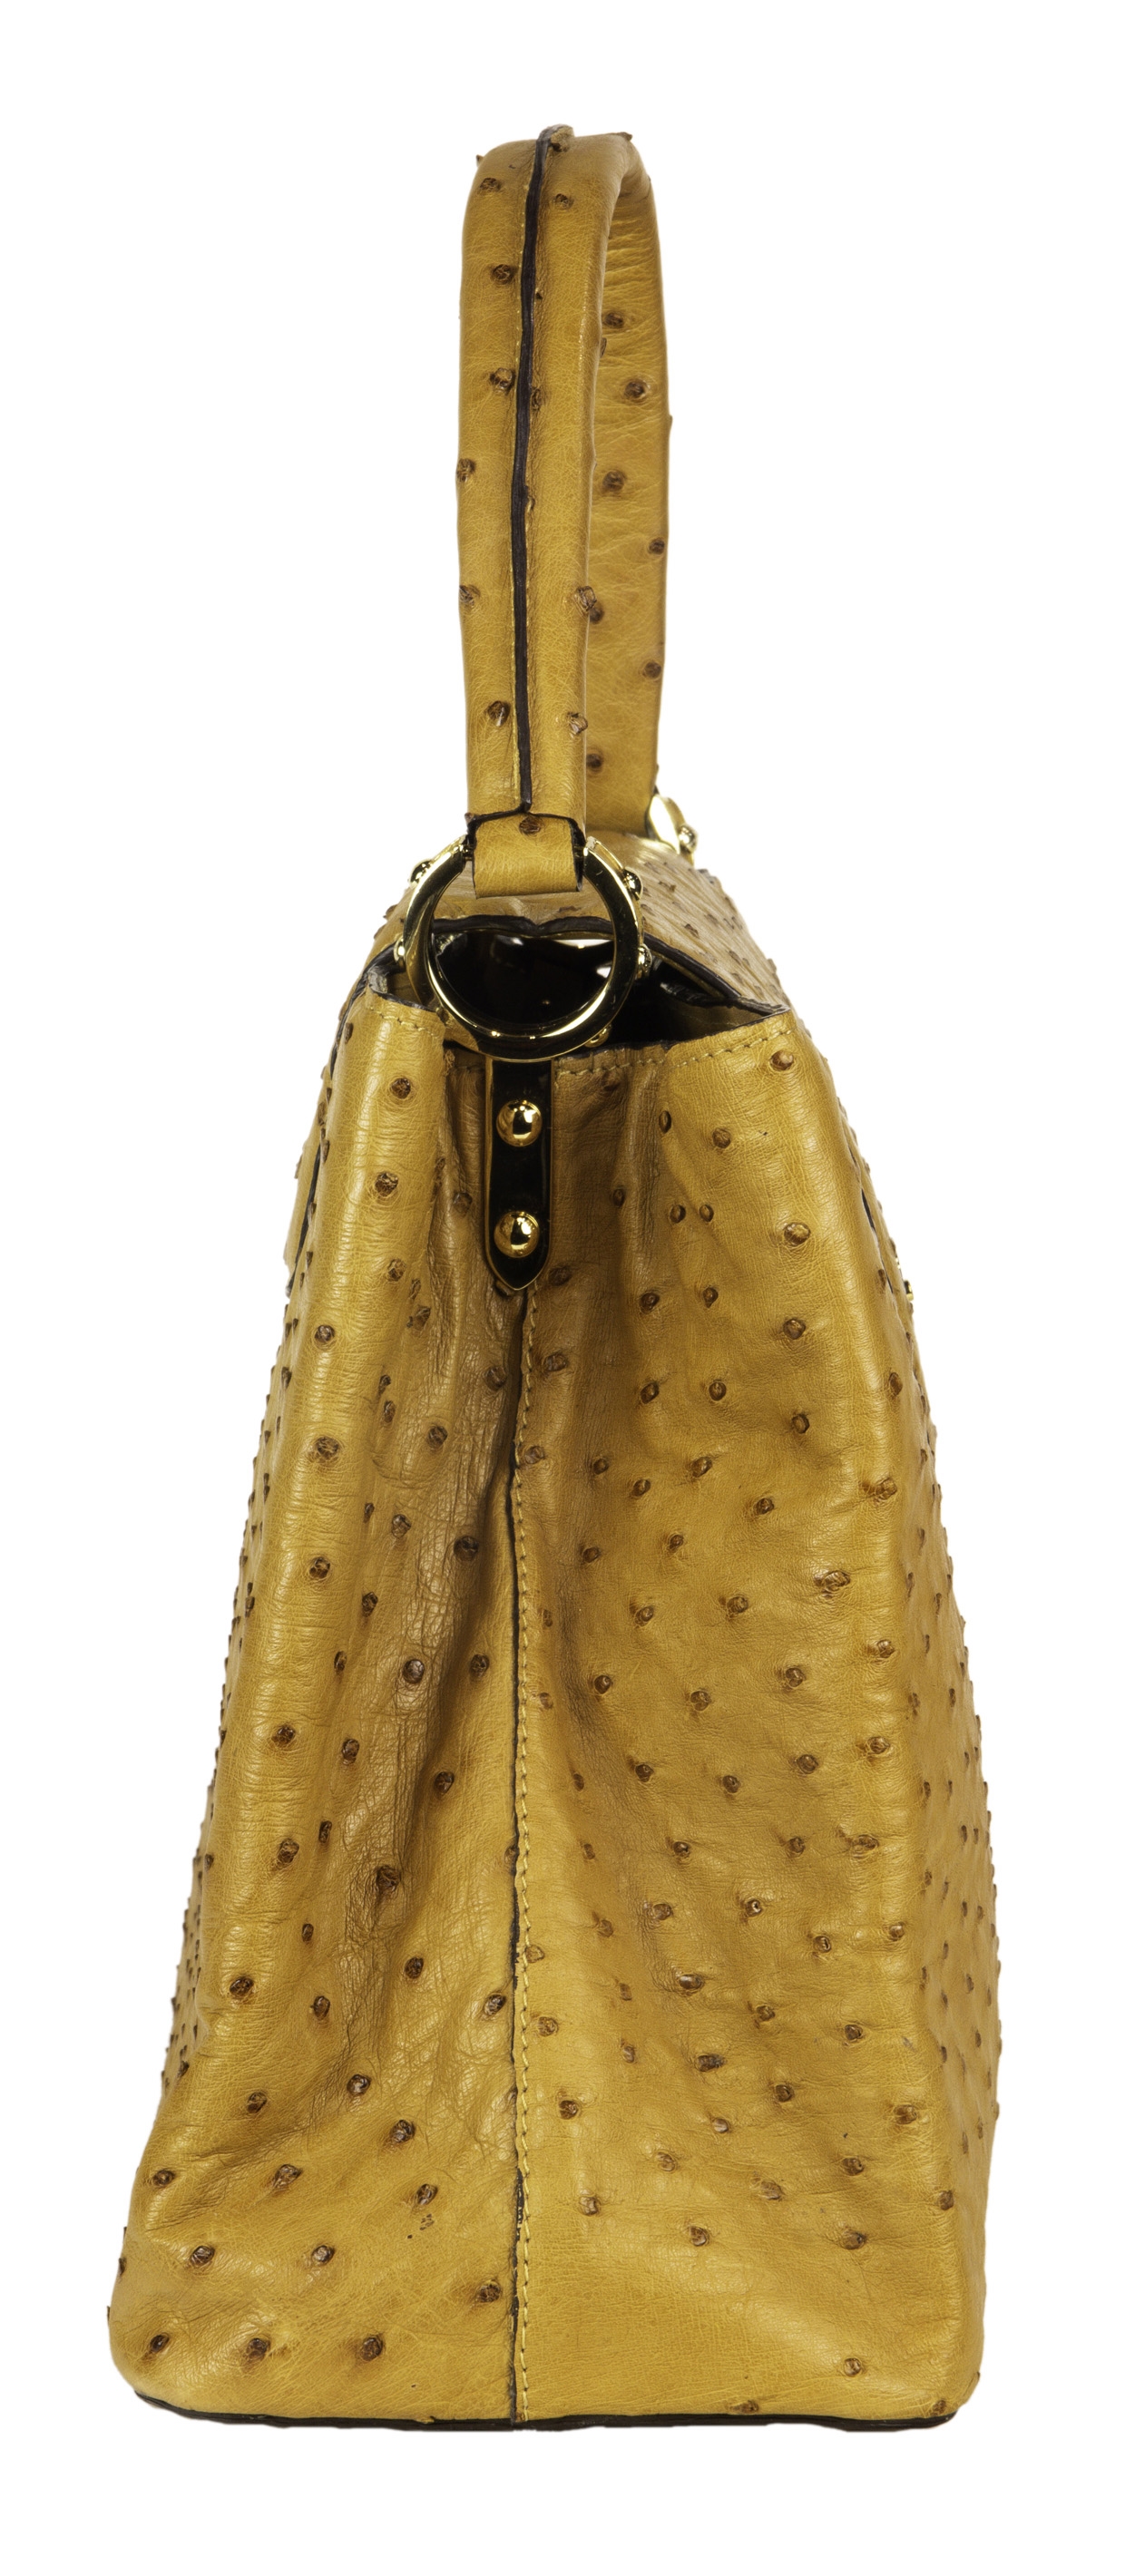 Louis Vuitton, Louis Vuitton style handbag, in the Capucines Ostrich MM  style executed in tan ostrich leather